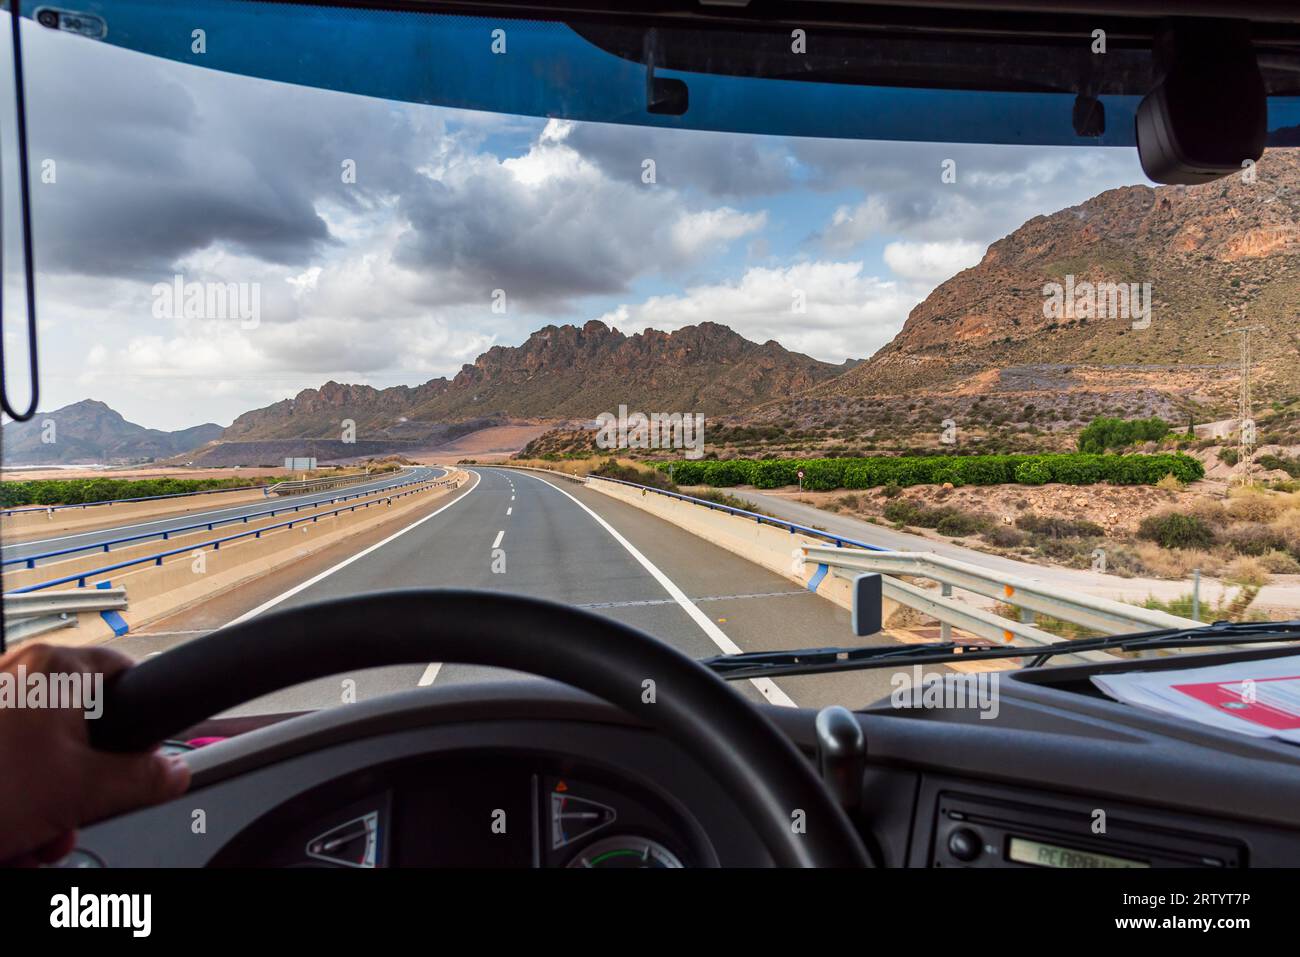 View from the driving position of a truck of the highway and a landscape of mountains in the background at dawn. Stock Photo